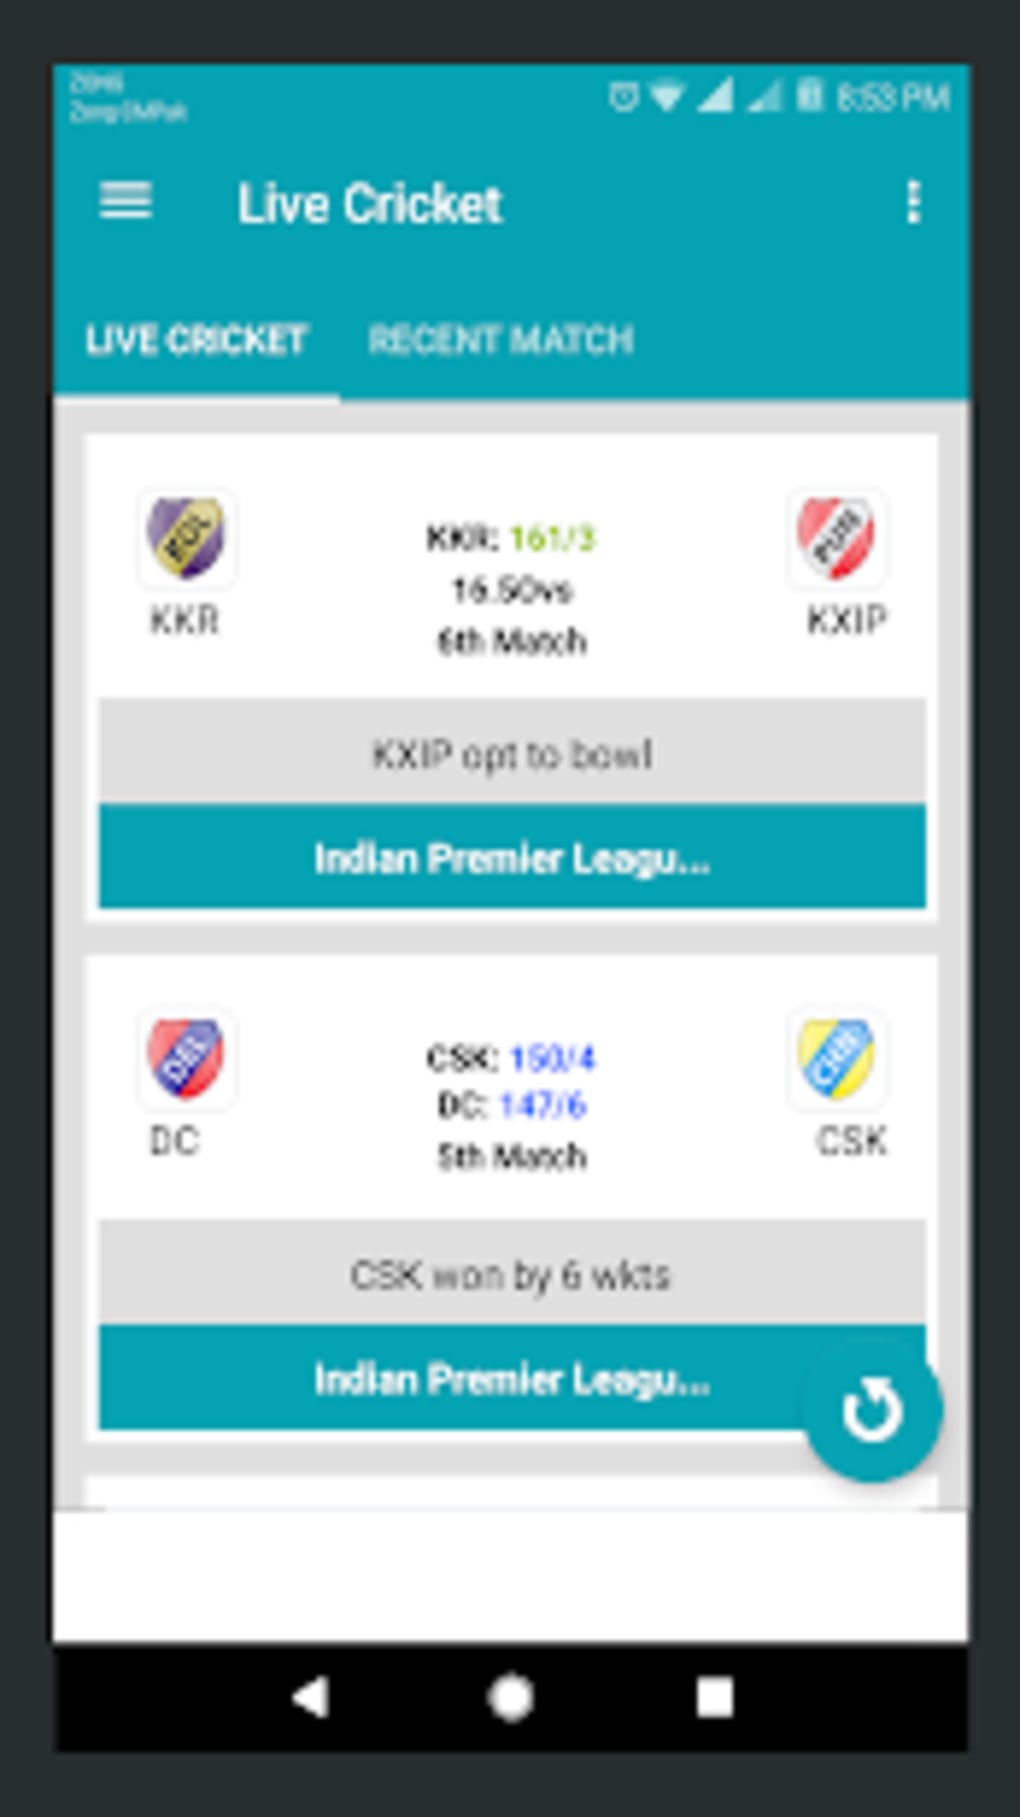 Latest IPL Live Cricket Score Android App By GSBusiness